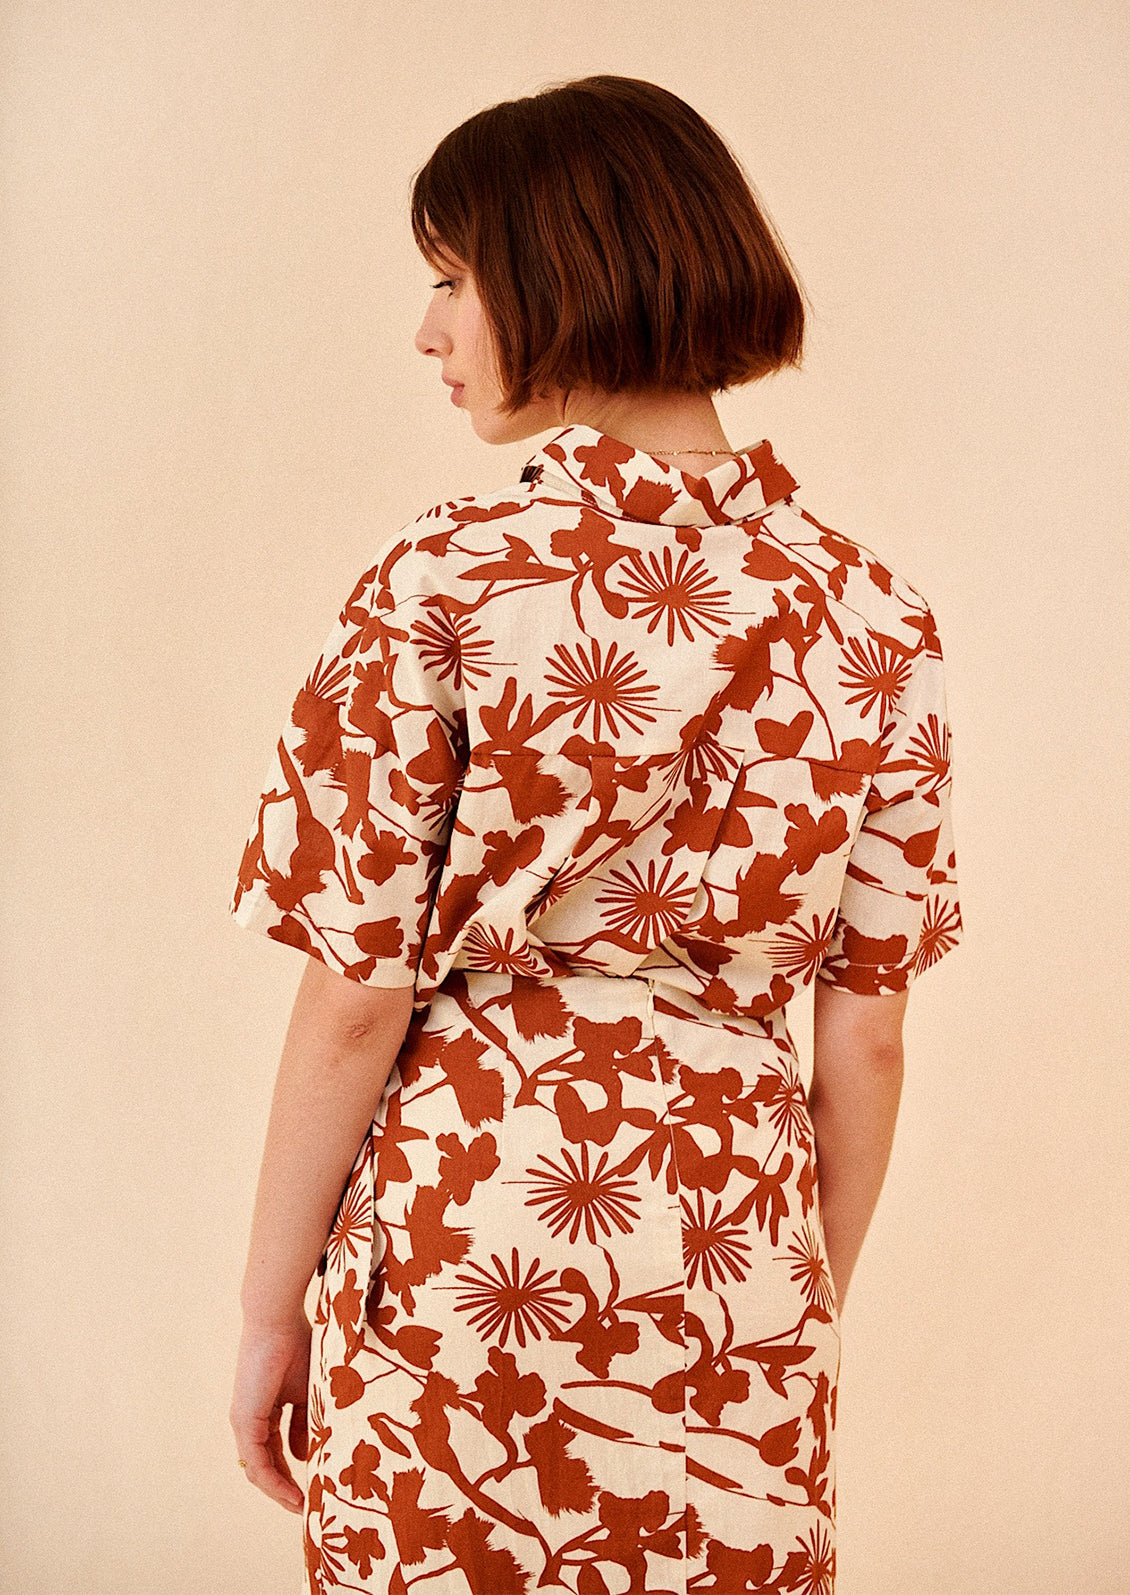 A woman wearing a short sleeve safari-style shirt in brown and white botanical print.